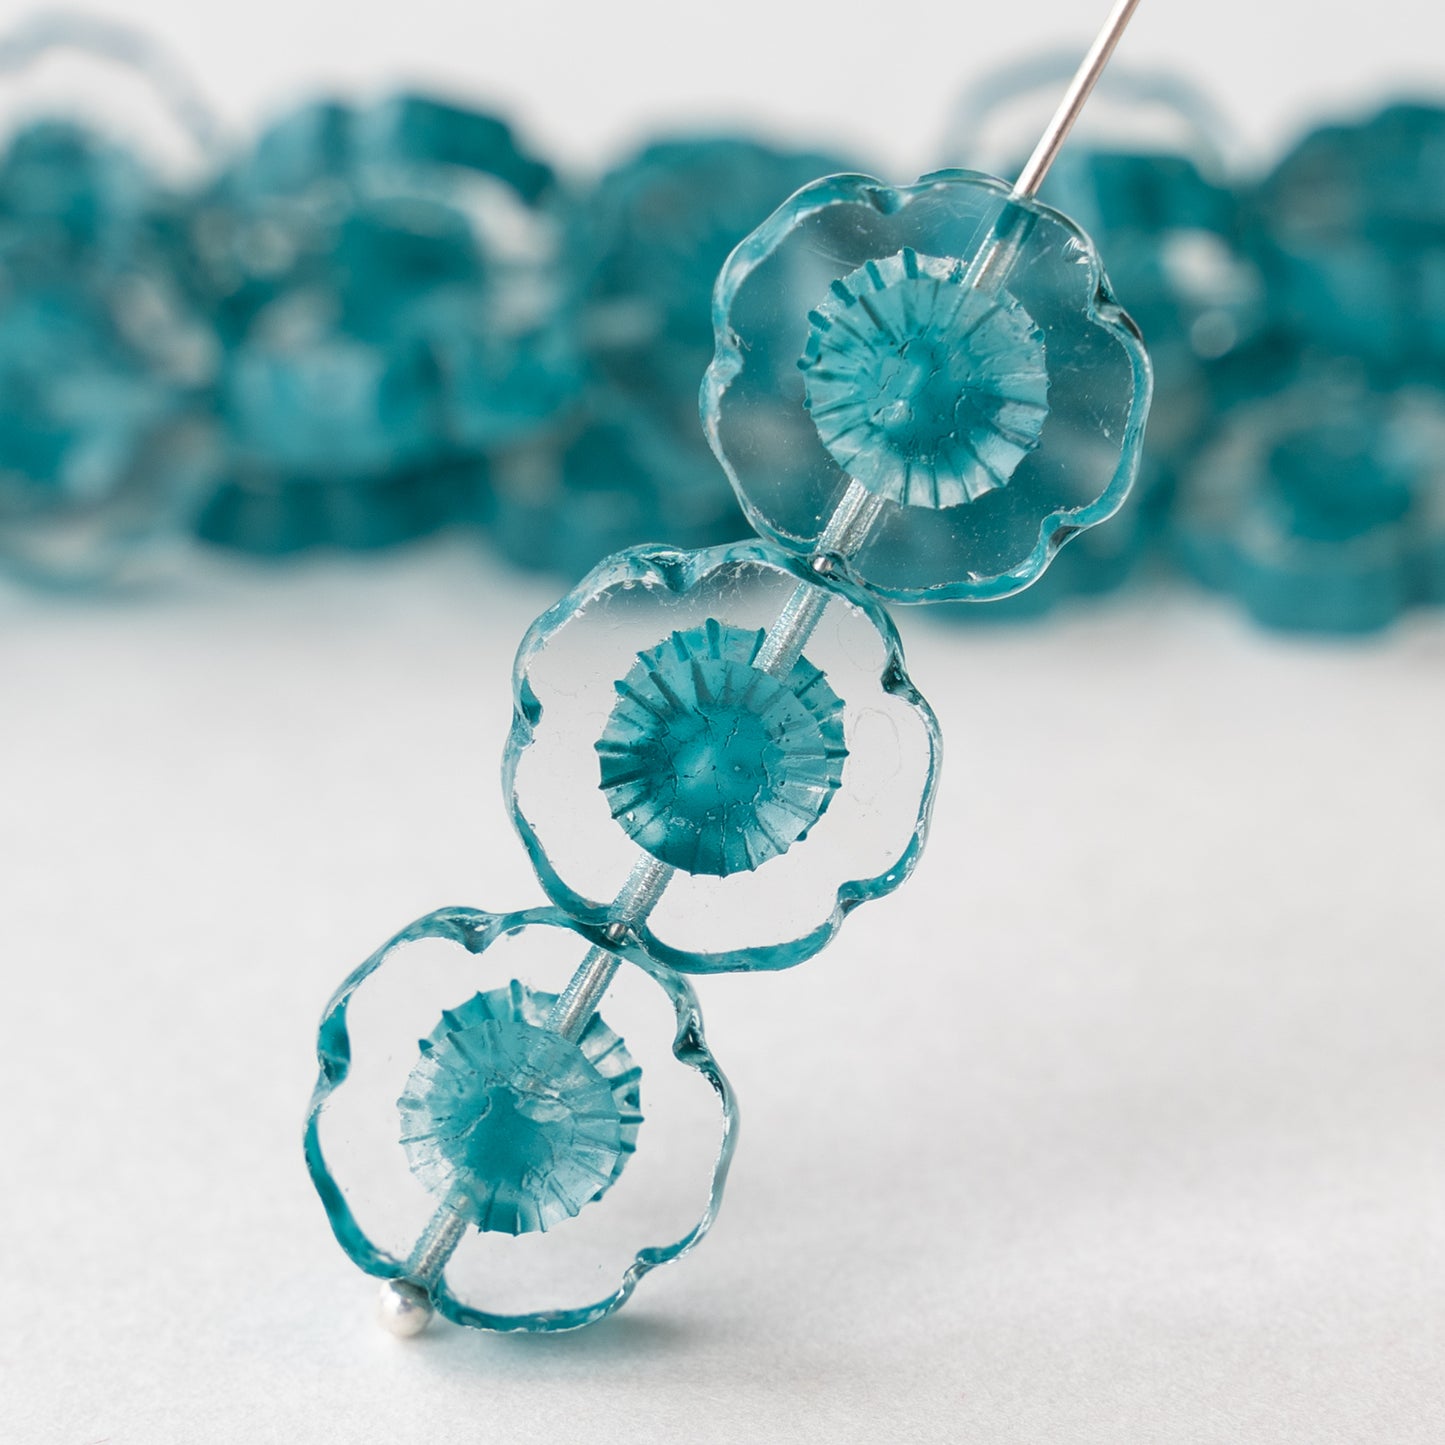 14mm Hibiscus Flower Bead - Crystal with Teal Wash - 10